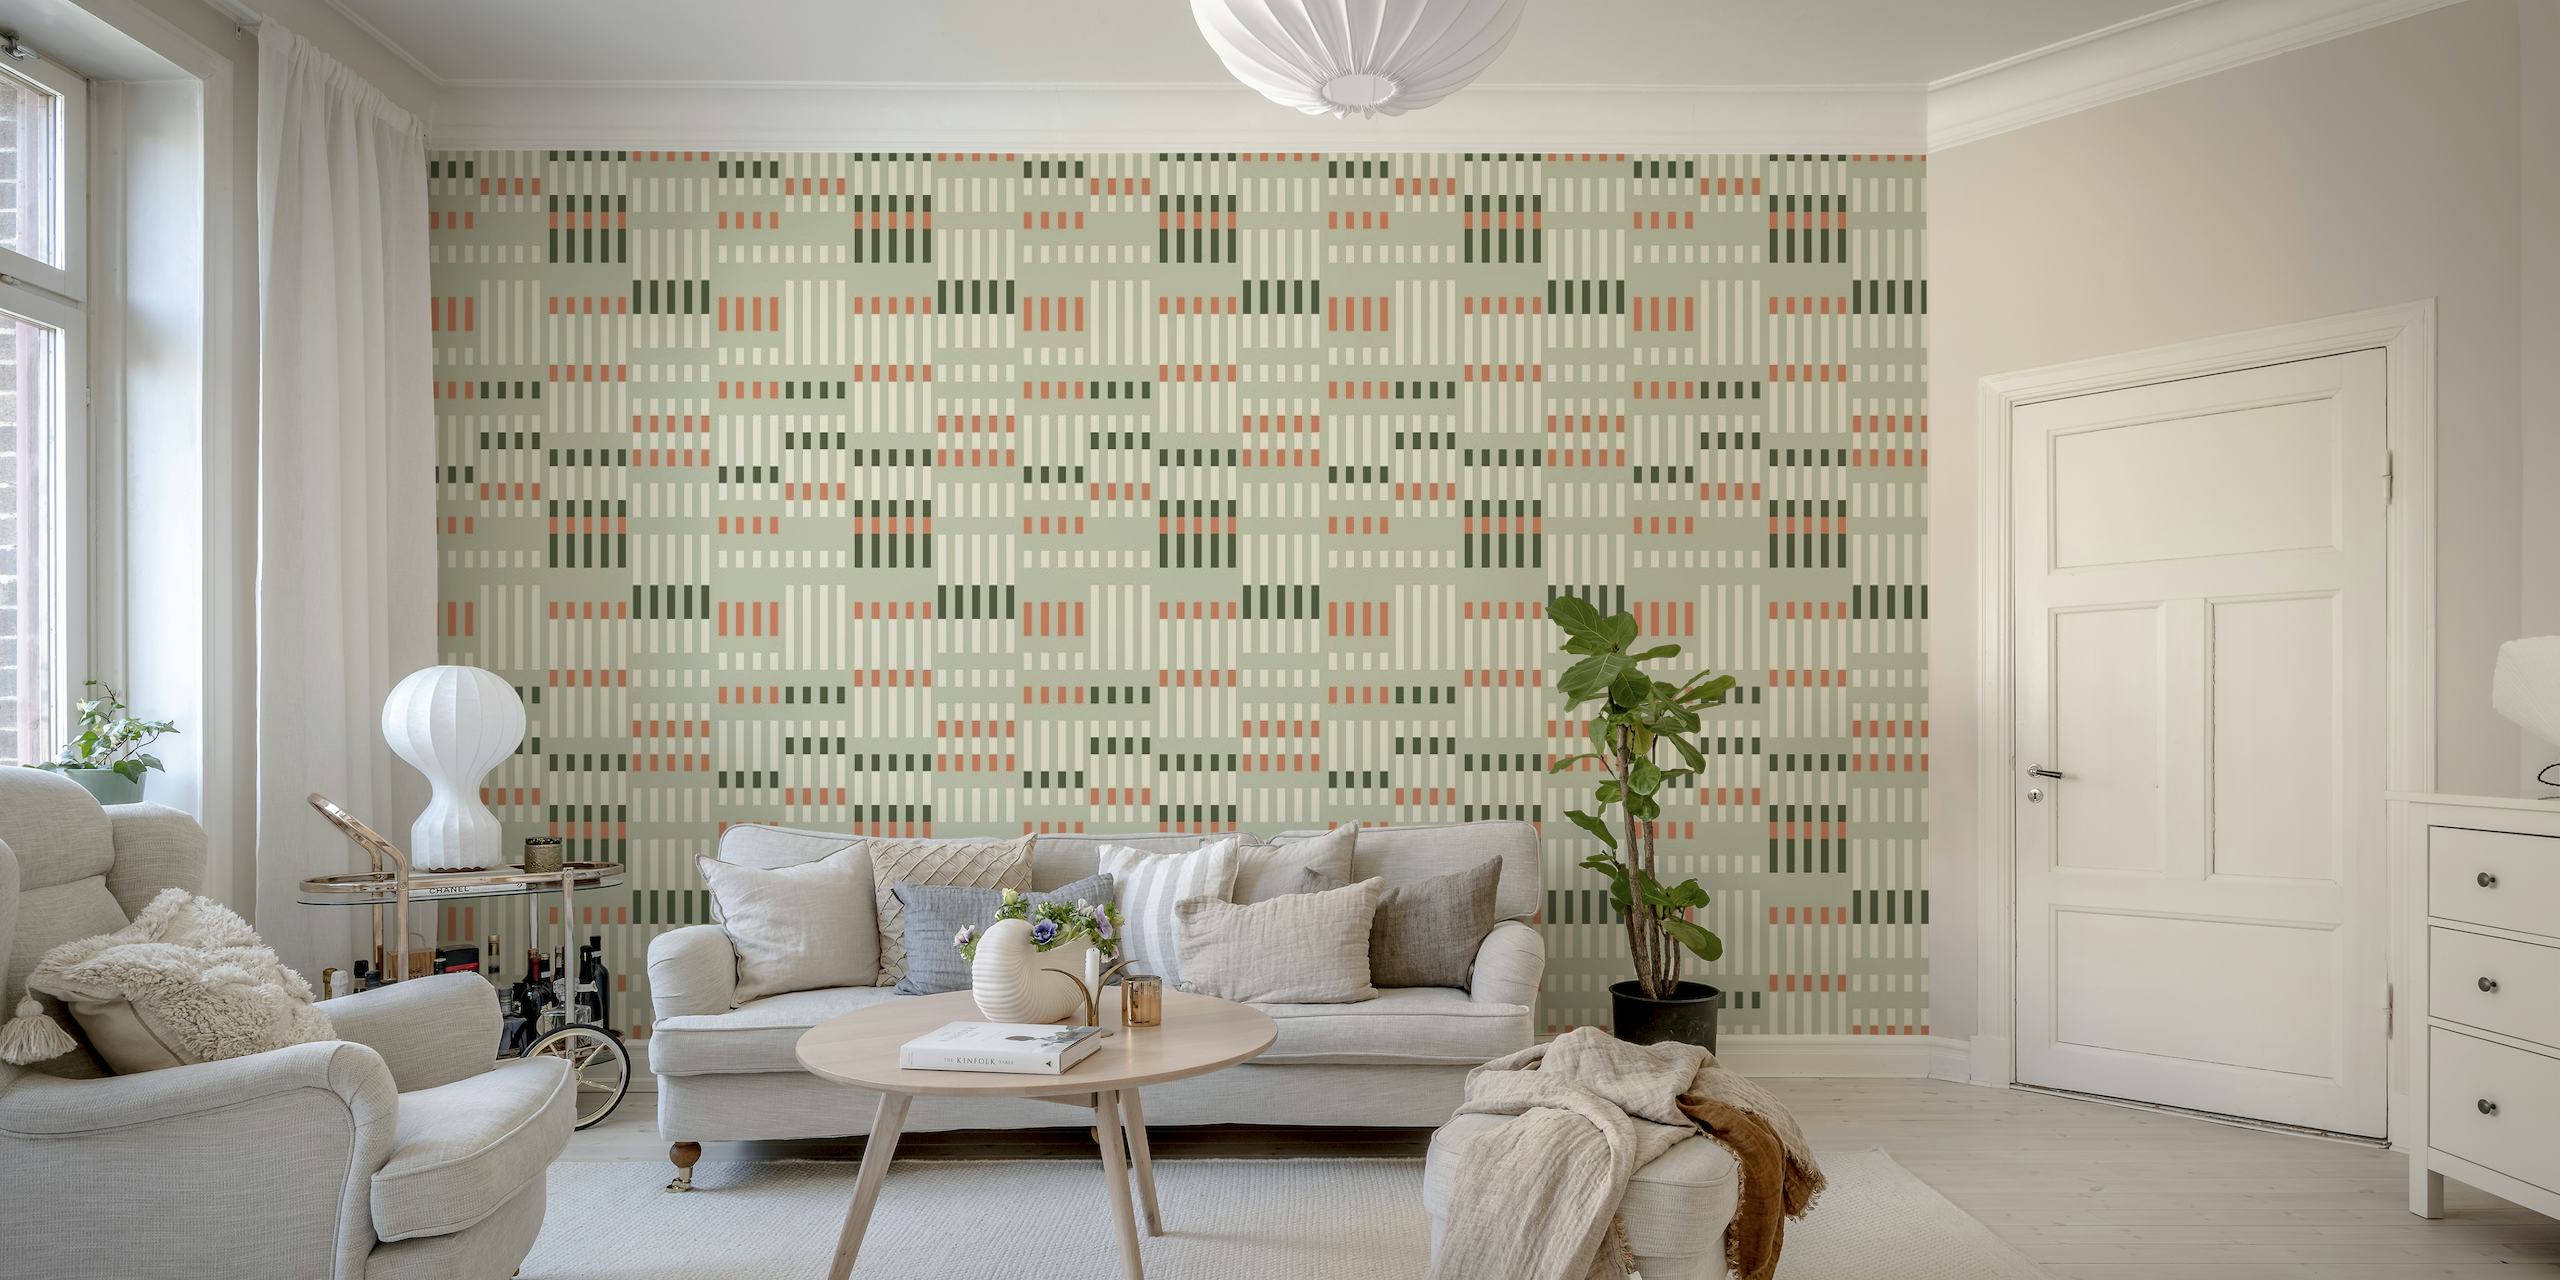 Abstract shapes wall mural in hues of beige, terra cotta, and pastel blue